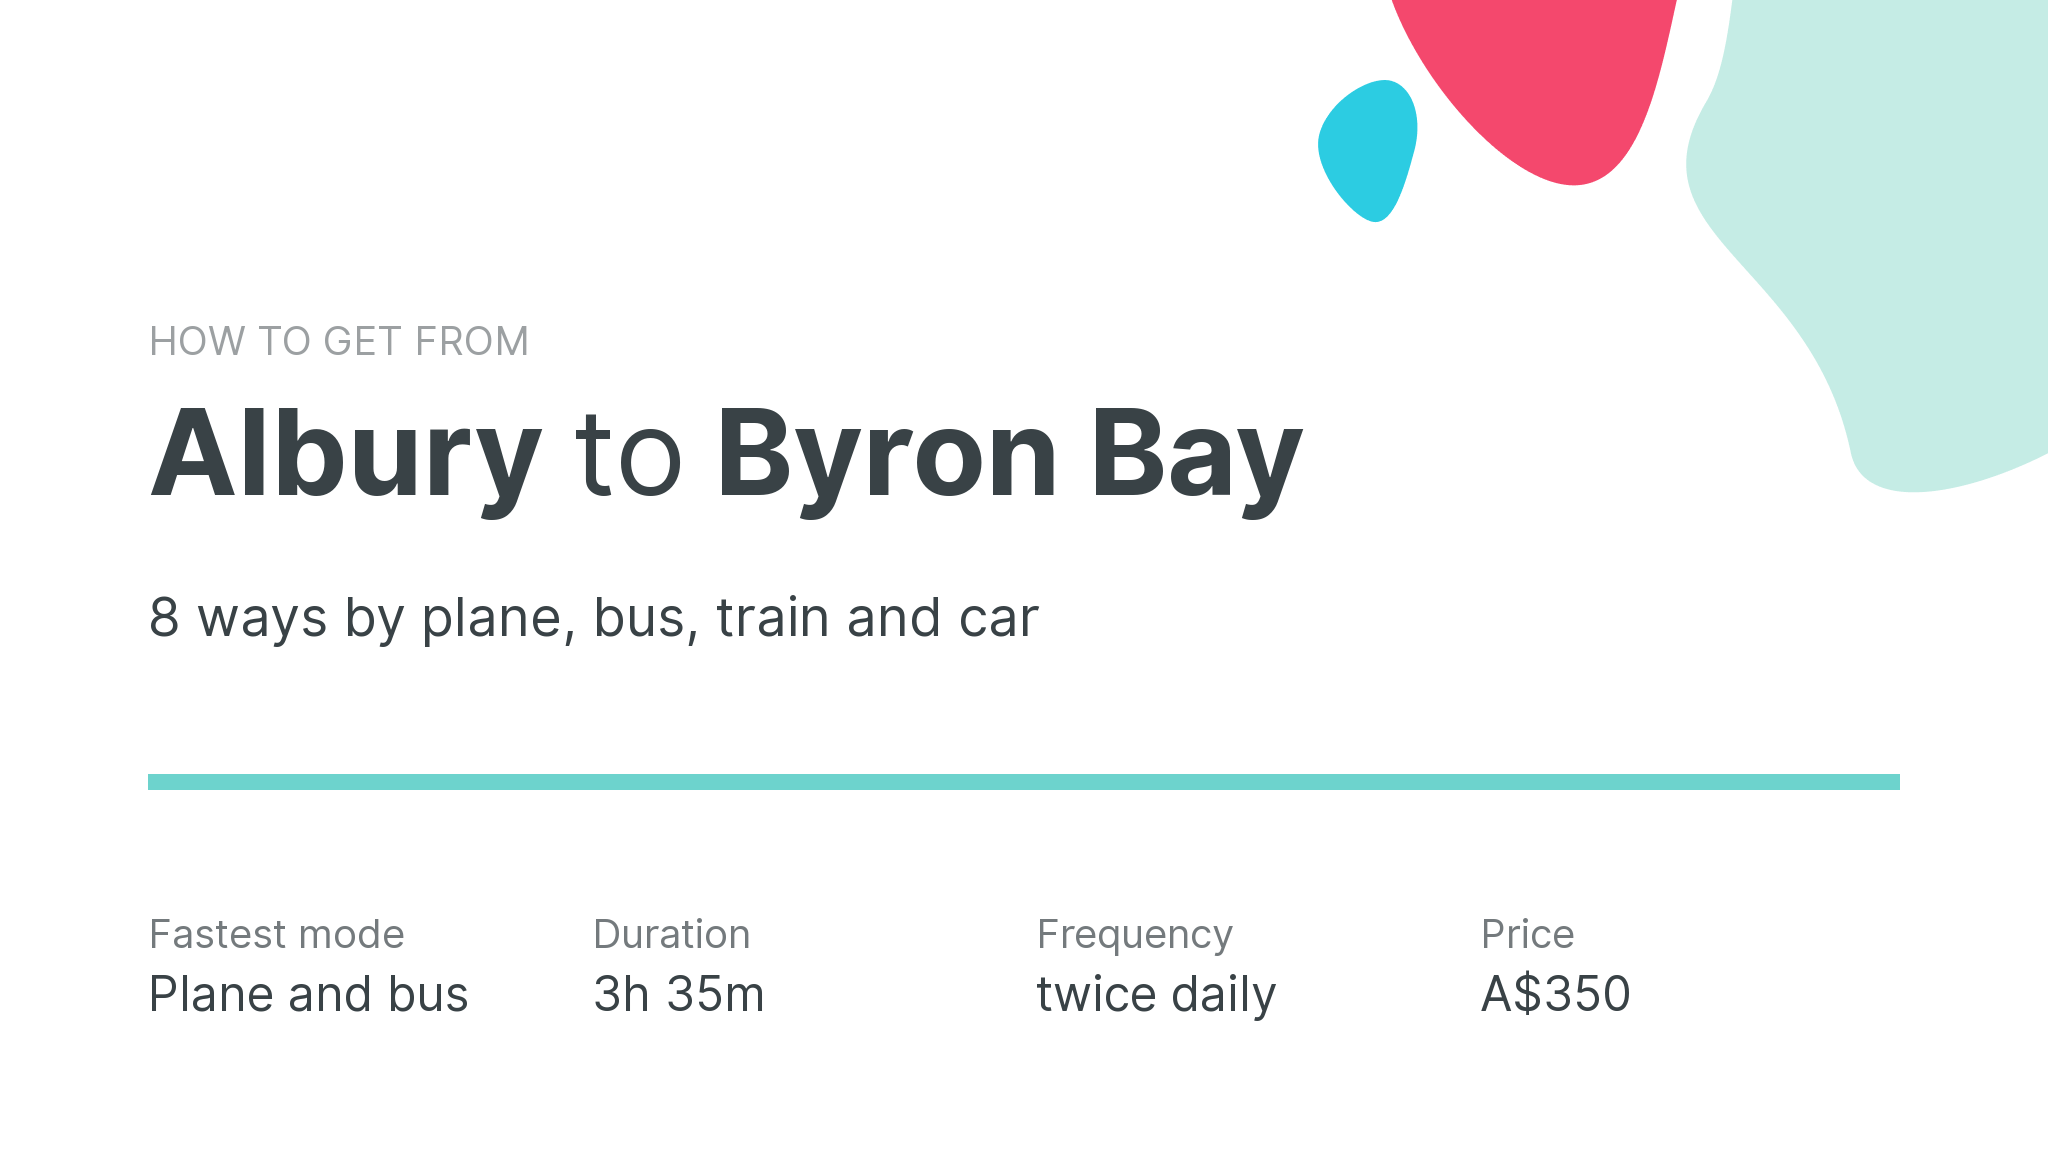 How do I get from Albury to Byron Bay